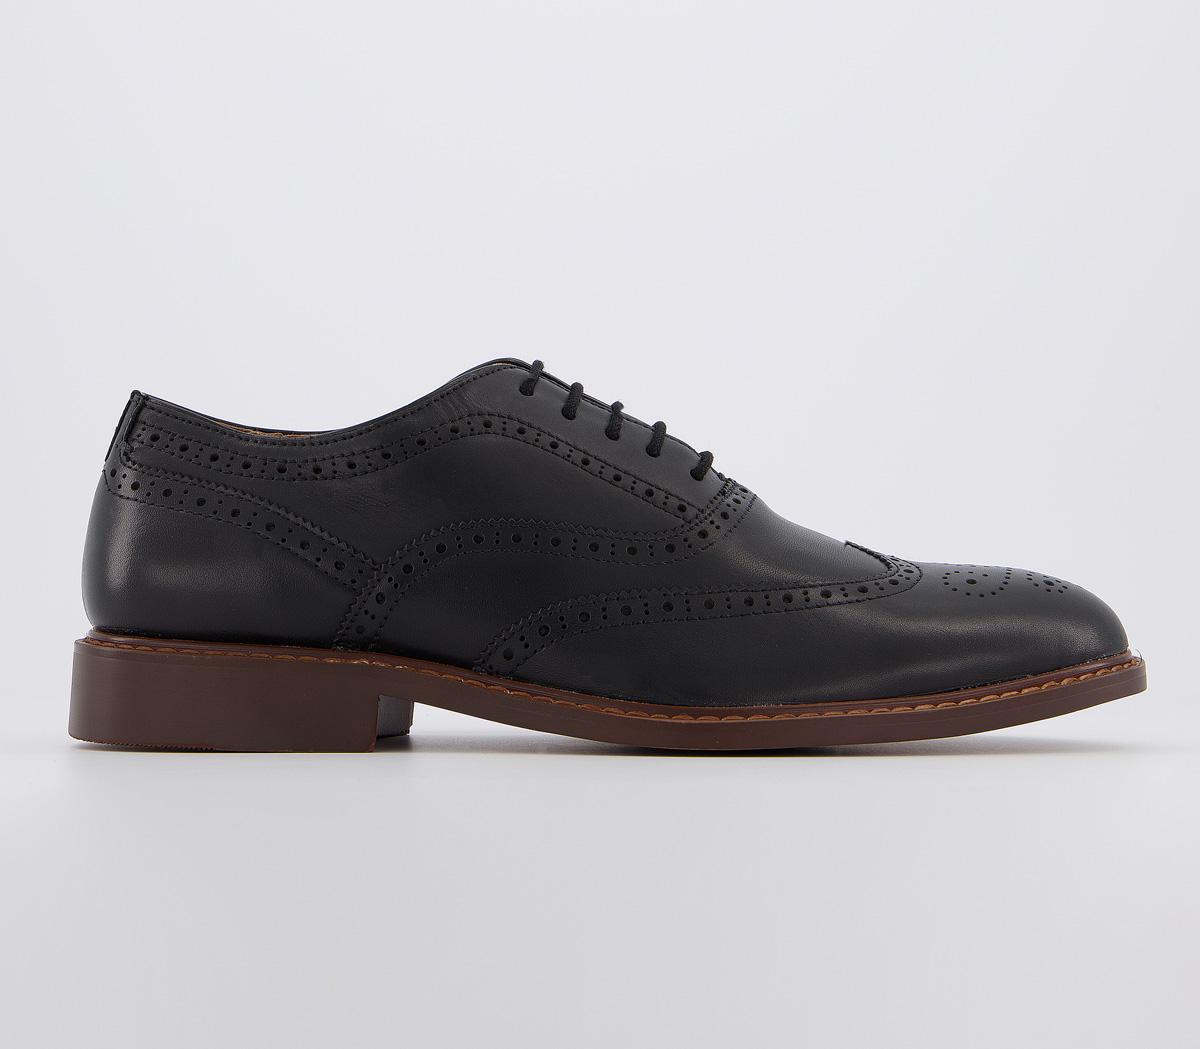 OFFICE Mean Brogue Shoes Black Leather - Mens Brogues